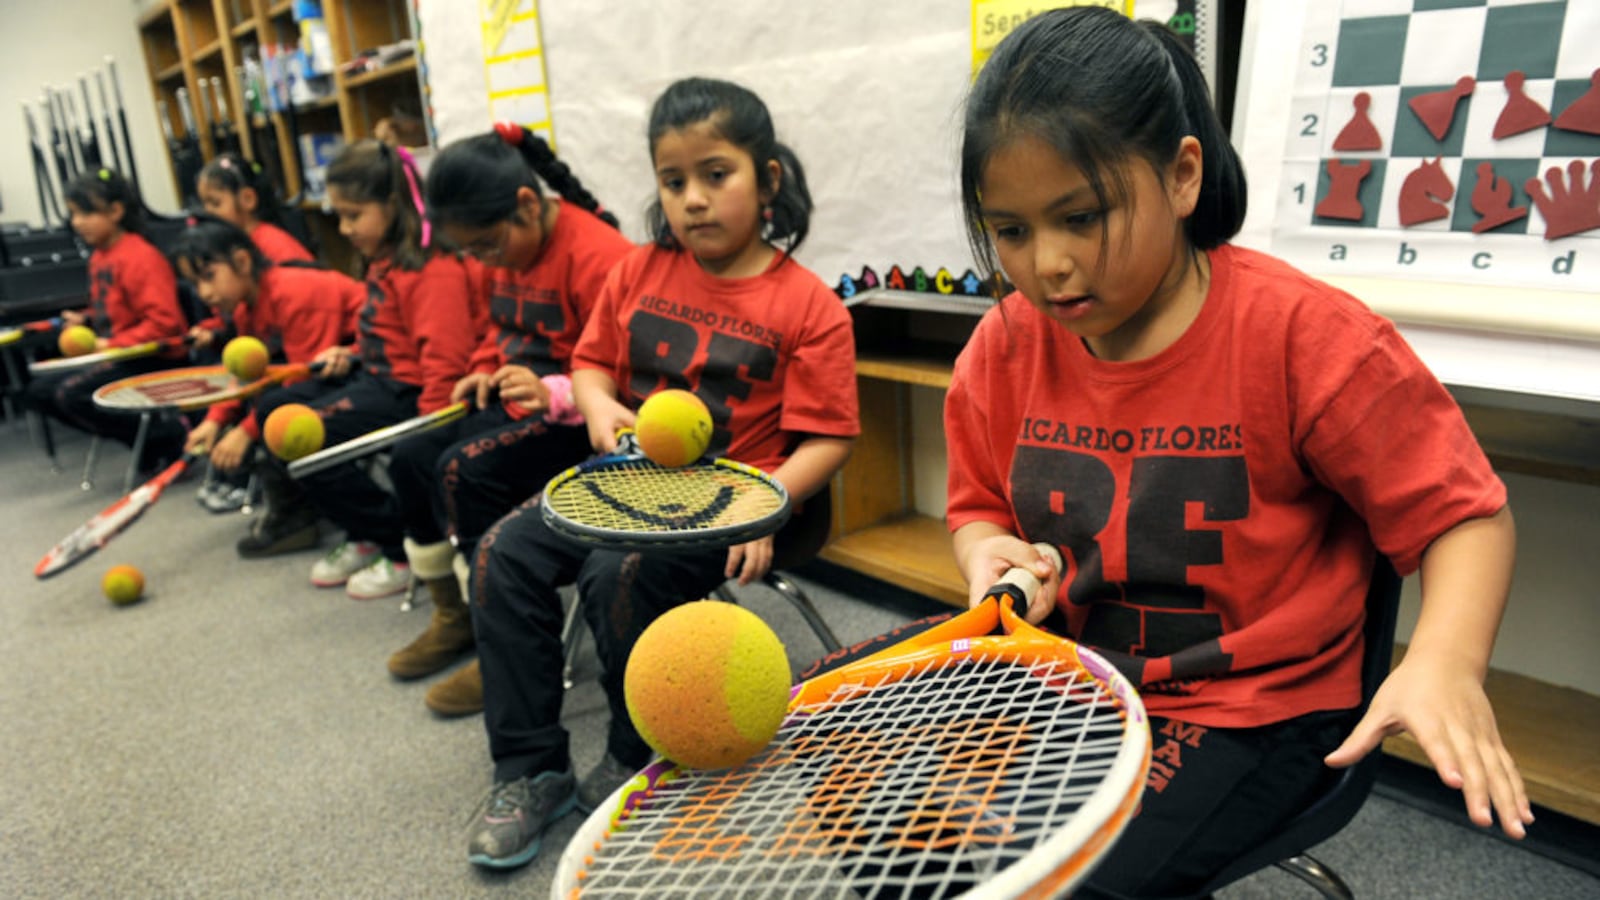 Samantha Belmontes, 7, tries to keep a foam ball rolling in the center of her tennis racket for as long as she can in a class at Ricardo Flores Magón Academy in 2011. (Photo By Helen H. Richardson/The Denver Post via Getty Images)